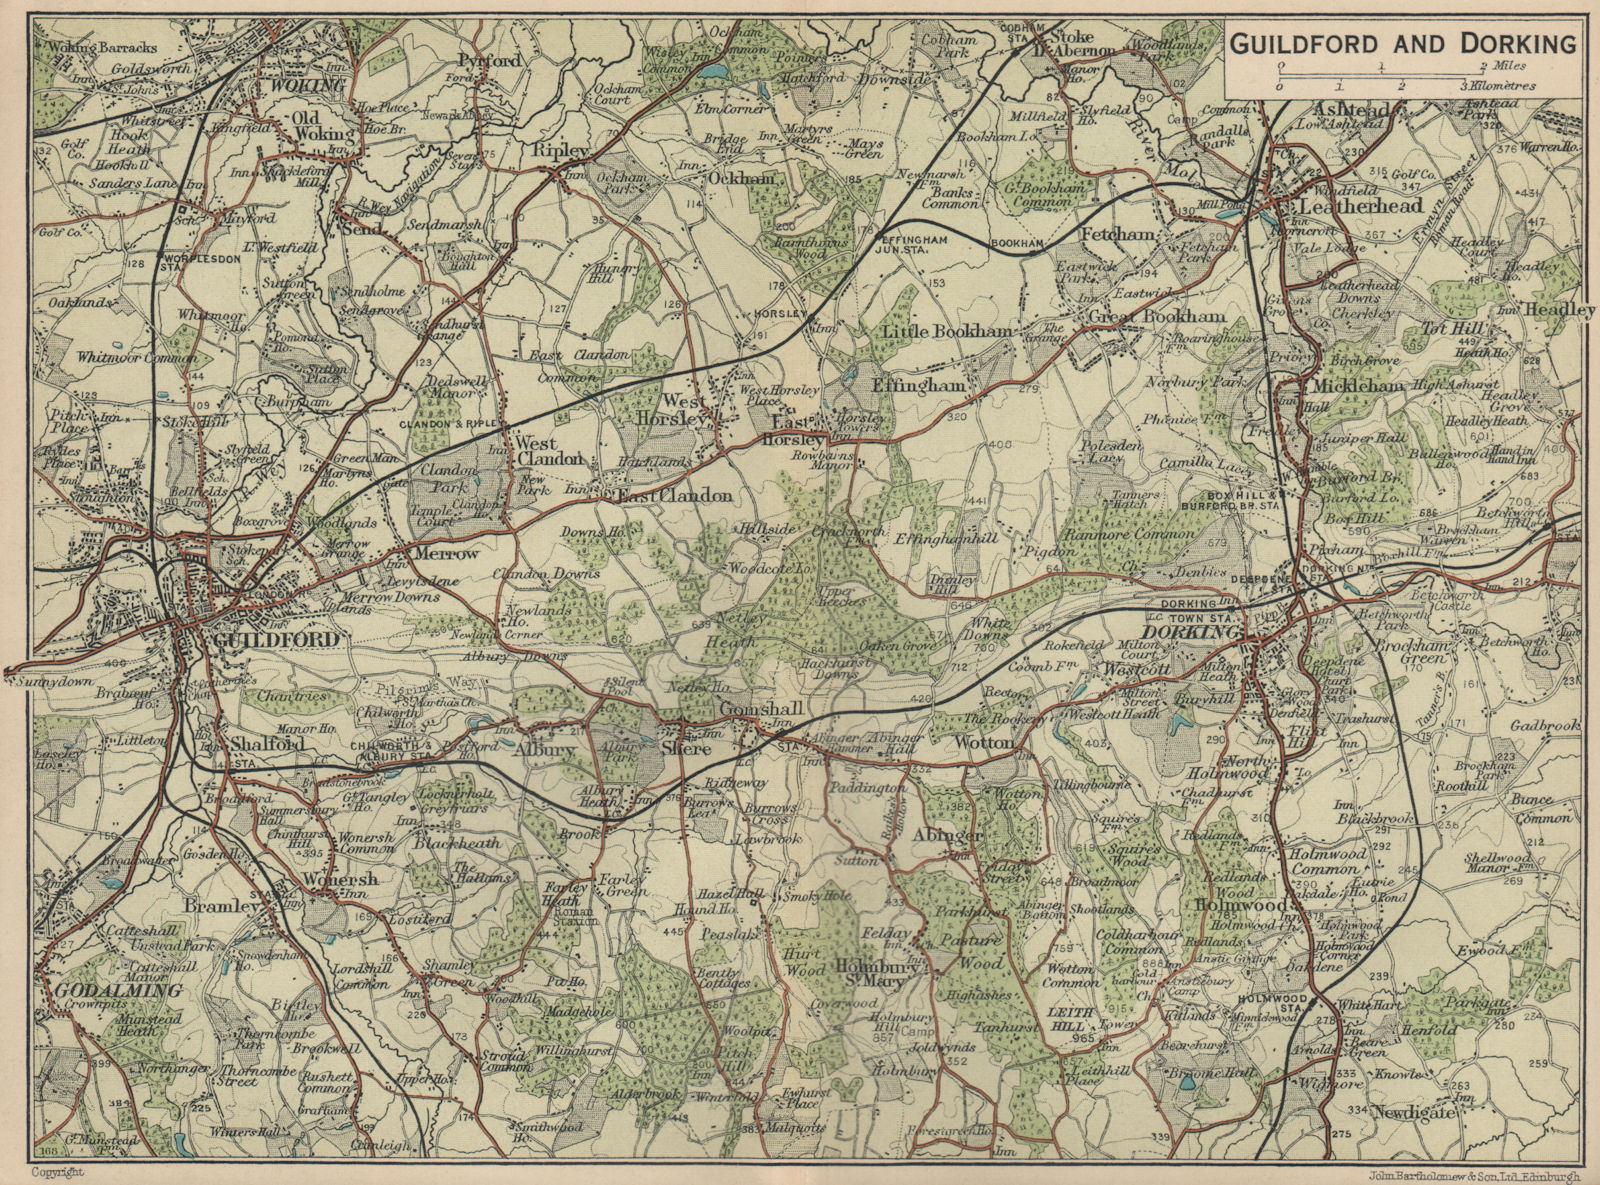 Associate Product GUILDFORD, DORKING & LEATHERHEAD. Surrey Hills. Godalming Woking 1939 old map